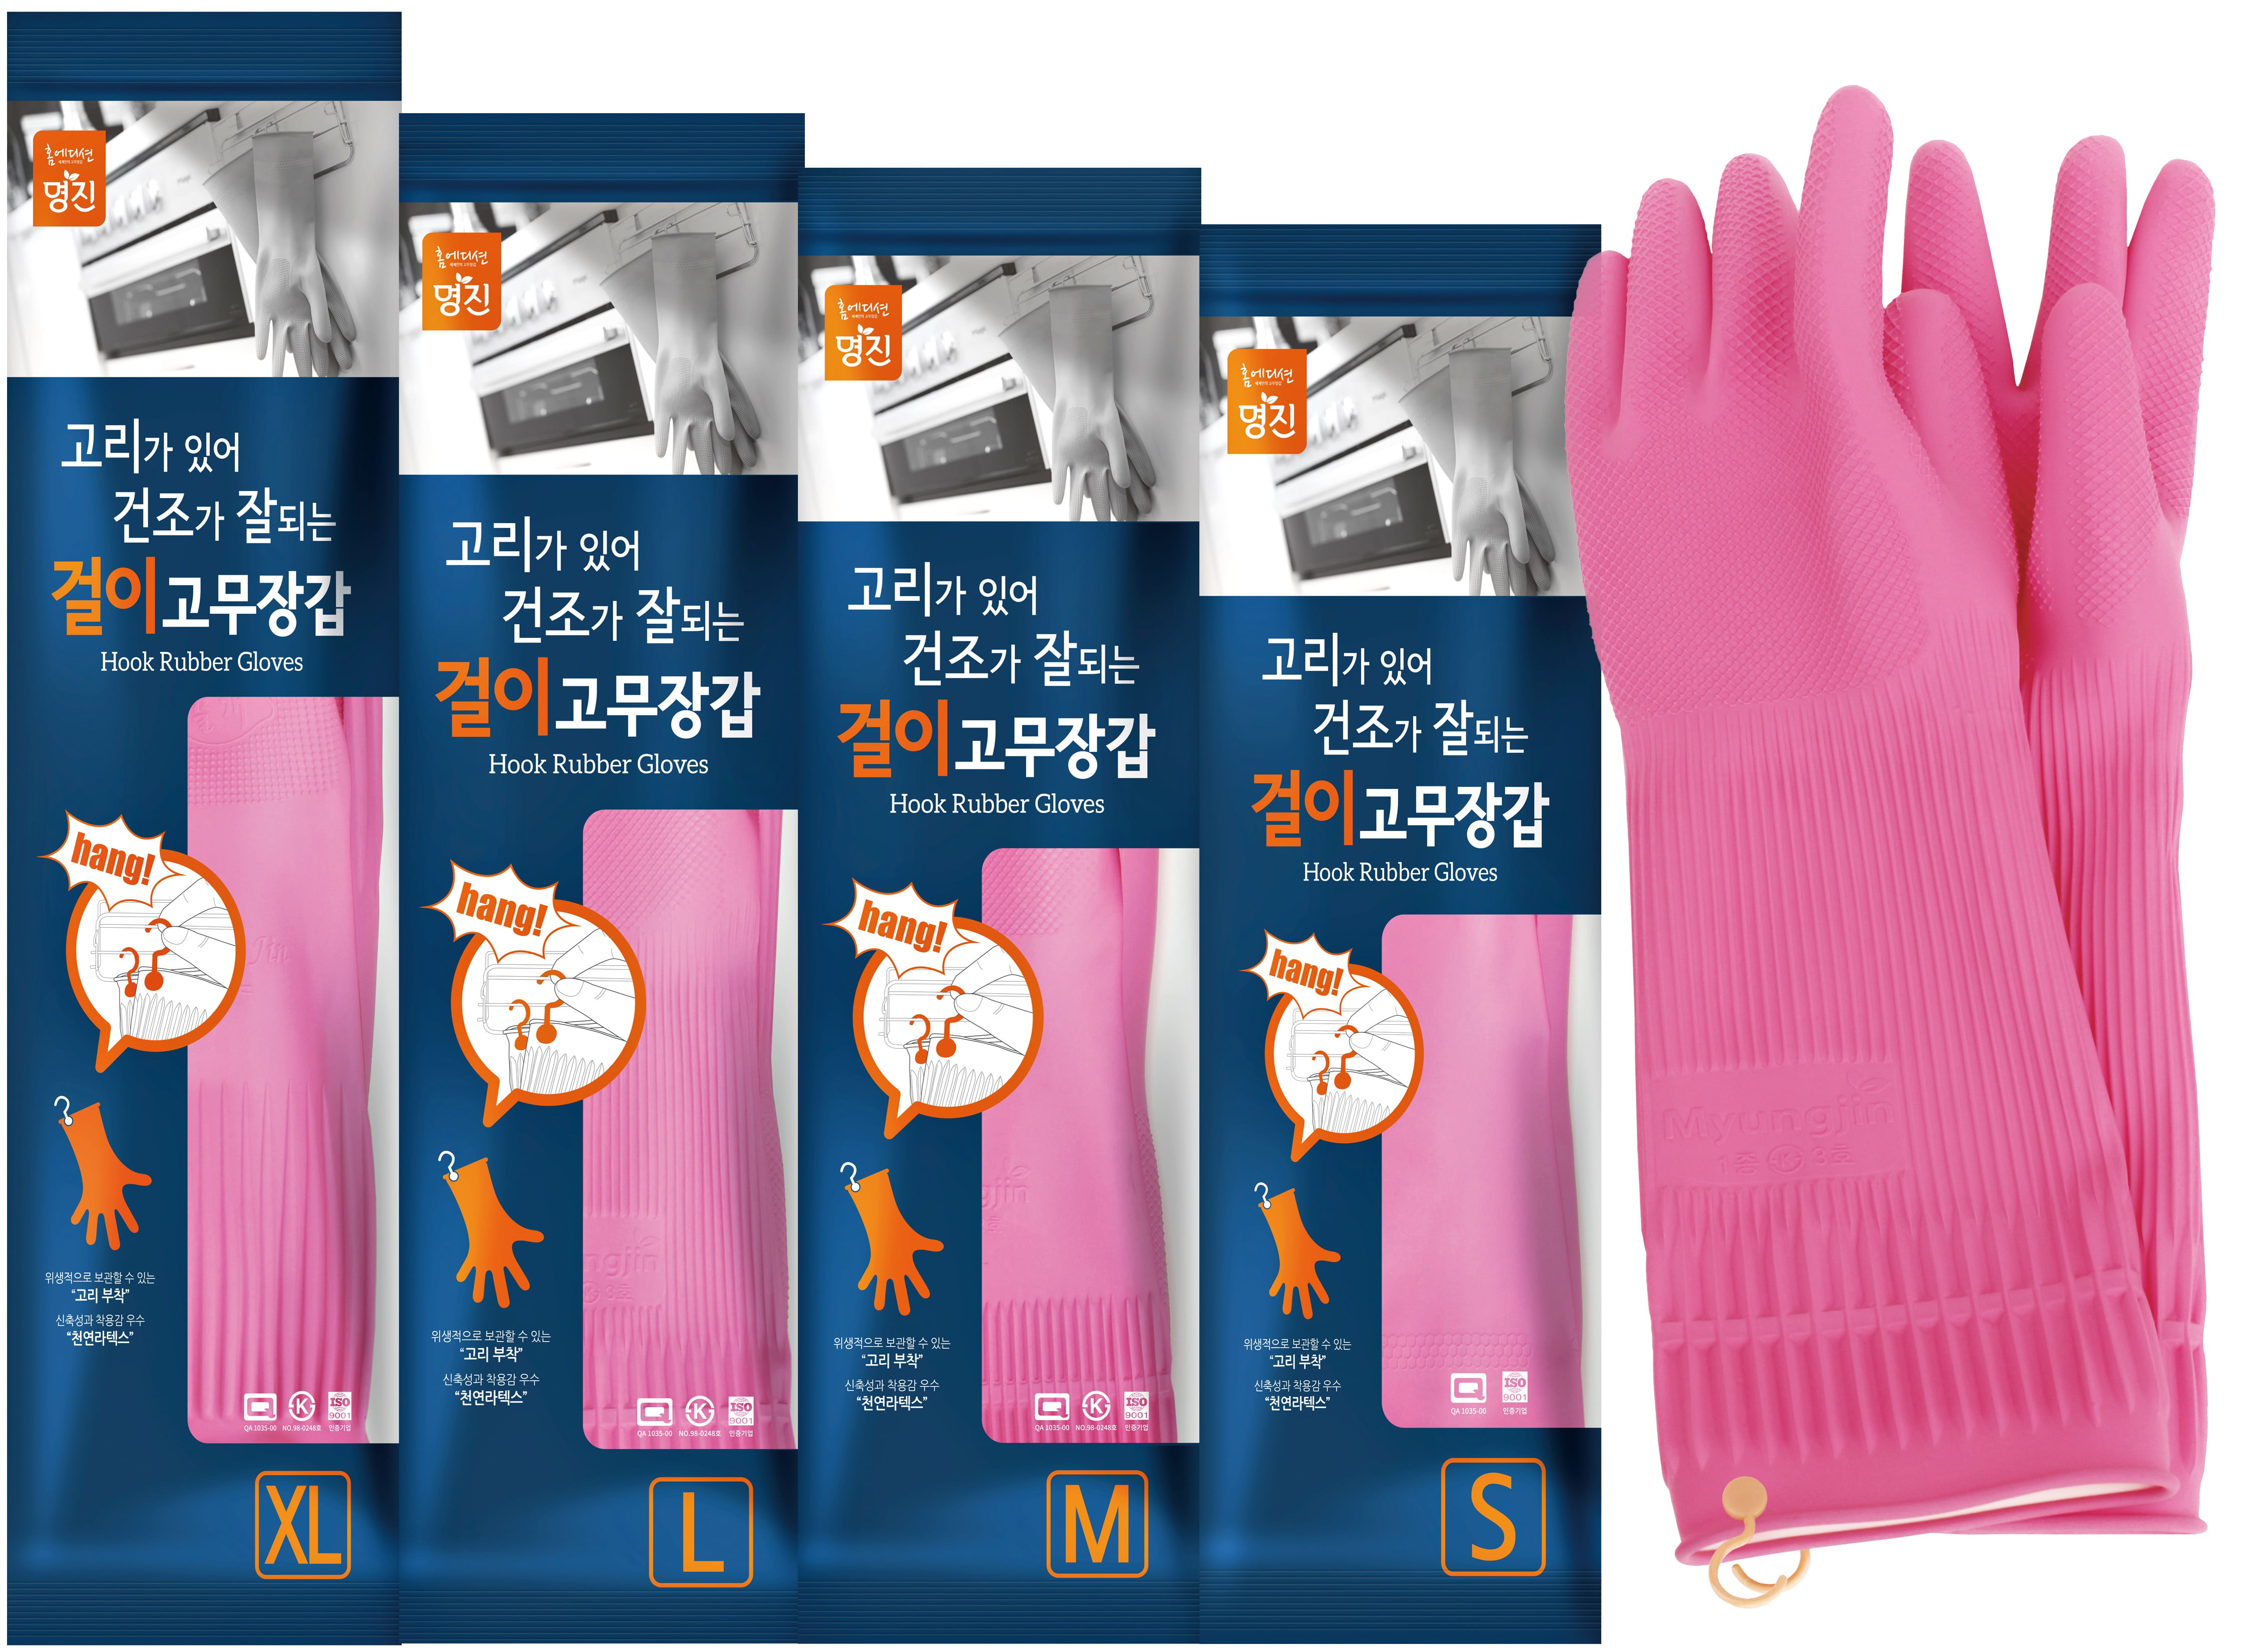 Waterproof Kitchen Cleaning Rubber Gloves for Dish Washing Laundry Cleaning,Multi Purpose Non Slip Reusable Waterproof Latex Household Gloves Pink 